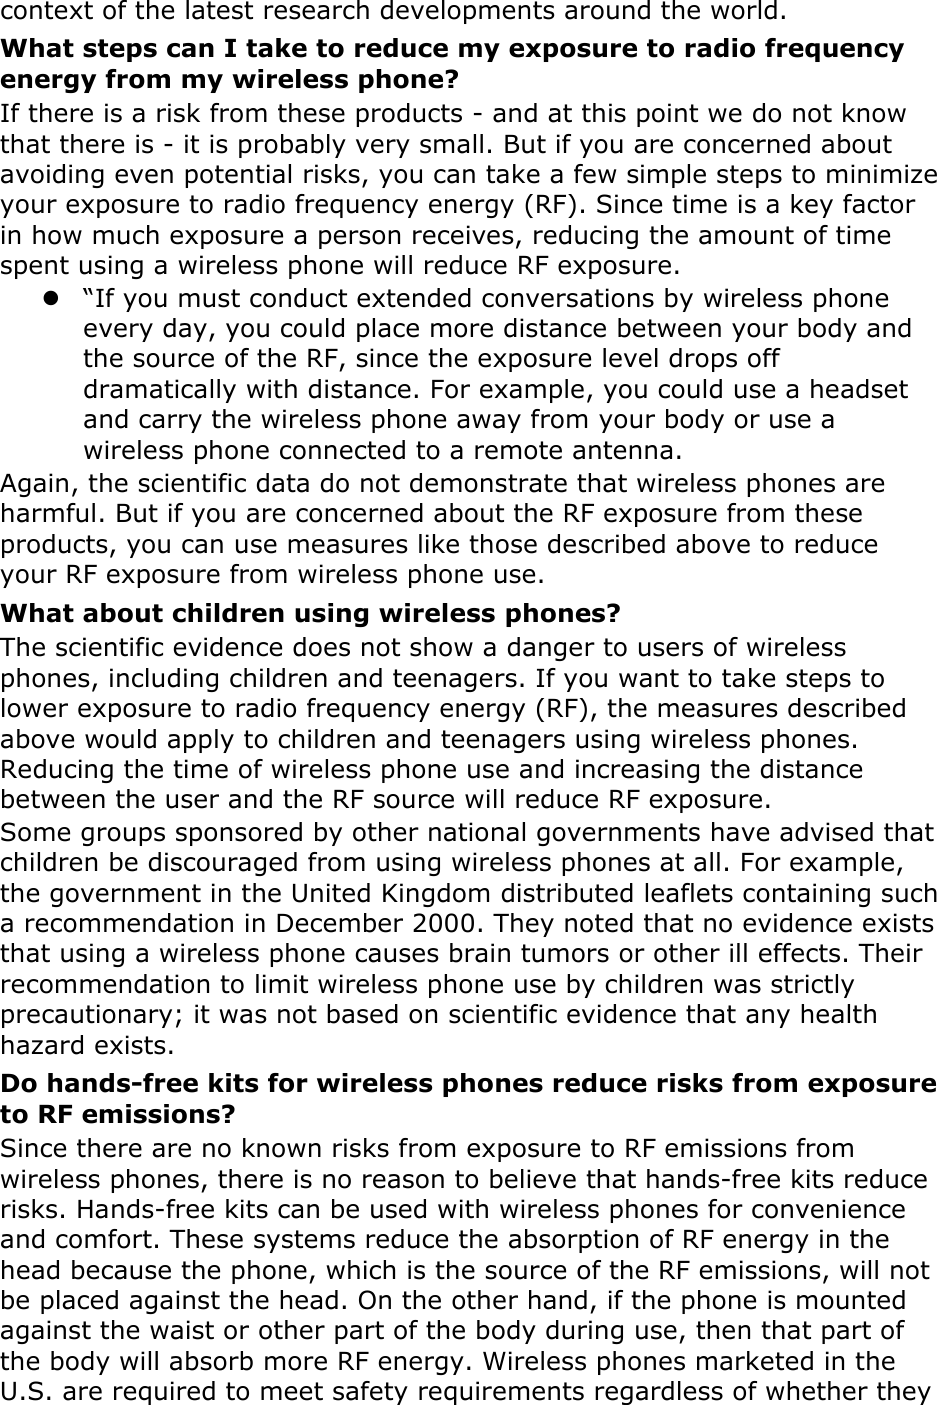 context of the latest research developments around the world. What steps can I take to reduce my exposure to radio frequency energy from my wireless phone? If there is a risk from these products - and at this point we do not know that there is - it is probably very small. But if you are concerned about avoiding even potential risks, you can take a few simple steps to minimize your exposure to radio frequency energy (RF). Since time is a key factor in how much exposure a person receives, reducing the amount of time spent using a wireless phone will reduce RF exposure.  “If you must conduct extended conversations by wireless phone every day, you could place more distance between your body and the source of the RF, since the exposure level drops off dramatically with distance. For example, you could use a headset and carry the wireless phone away from your body or use a wireless phone connected to a remote antenna. Again, the scientific data do not demonstrate that wireless phones are harmful. But if you are concerned about the RF exposure from these products, you can use measures like those described above to reduce your RF exposure from wireless phone use. What about children using wireless phones? The scientific evidence does not show a danger to users of wireless phones, including children and teenagers. If you want to take steps to lower exposure to radio frequency energy (RF), the measures described above would apply to children and teenagers using wireless phones. Reducing the time of wireless phone use and increasing the distance between the user and the RF source will reduce RF exposure. Some groups sponsored by other national governments have advised that children be discouraged from using wireless phones at all. For example, the government in the United Kingdom distributed leaflets containing such a recommendation in December 2000. They noted that no evidence exists that using a wireless phone causes brain tumors or other ill effects. Their recommendation to limit wireless phone use by children was strictly precautionary; it was not based on scientific evidence that any health hazard exists.   Do hands-free kits for wireless phones reduce risks from exposure to RF emissions? Since there are no known risks from exposure to RF emissions from wireless phones, there is no reason to believe that hands-free kits reduce risks. Hands-free kits can be used with wireless phones for convenience and comfort. These systems reduce the absorption of RF energy in the head because the phone, which is the source of the RF emissions, will not be placed against the head. On the other hand, if the phone is mounted against the waist or other part of the body during use, then that part of the body will absorb more RF energy. Wireless phones marketed in the U.S. are required to meet safety requirements regardless of whether they 